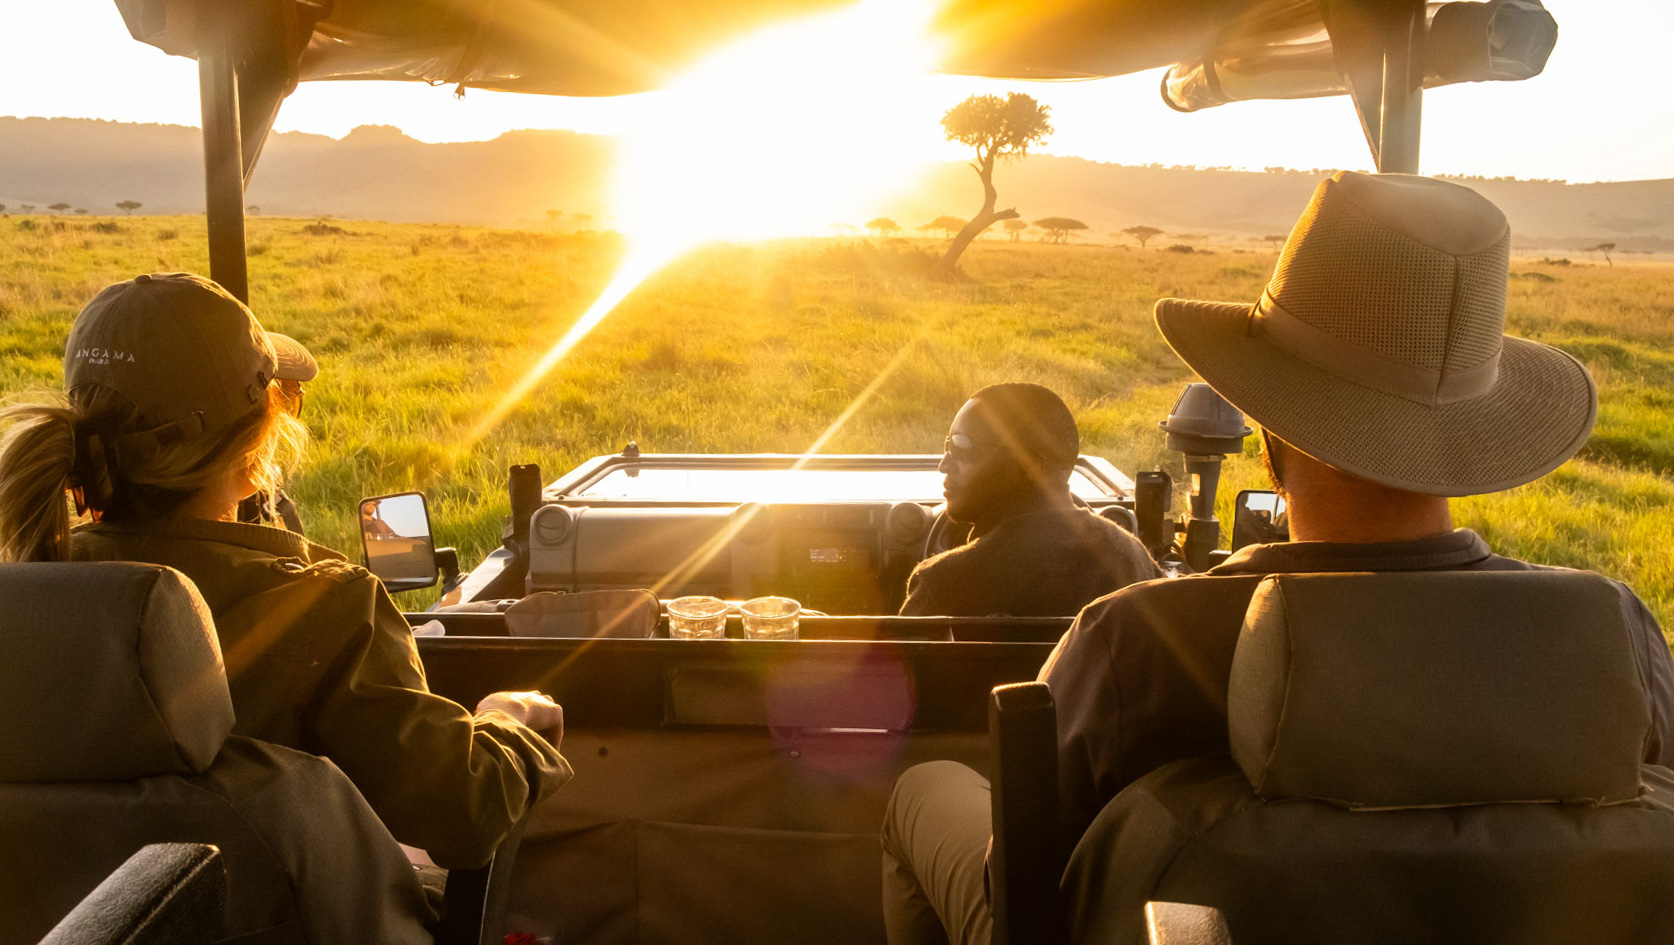 Above: There's never a dull moment in the Mara